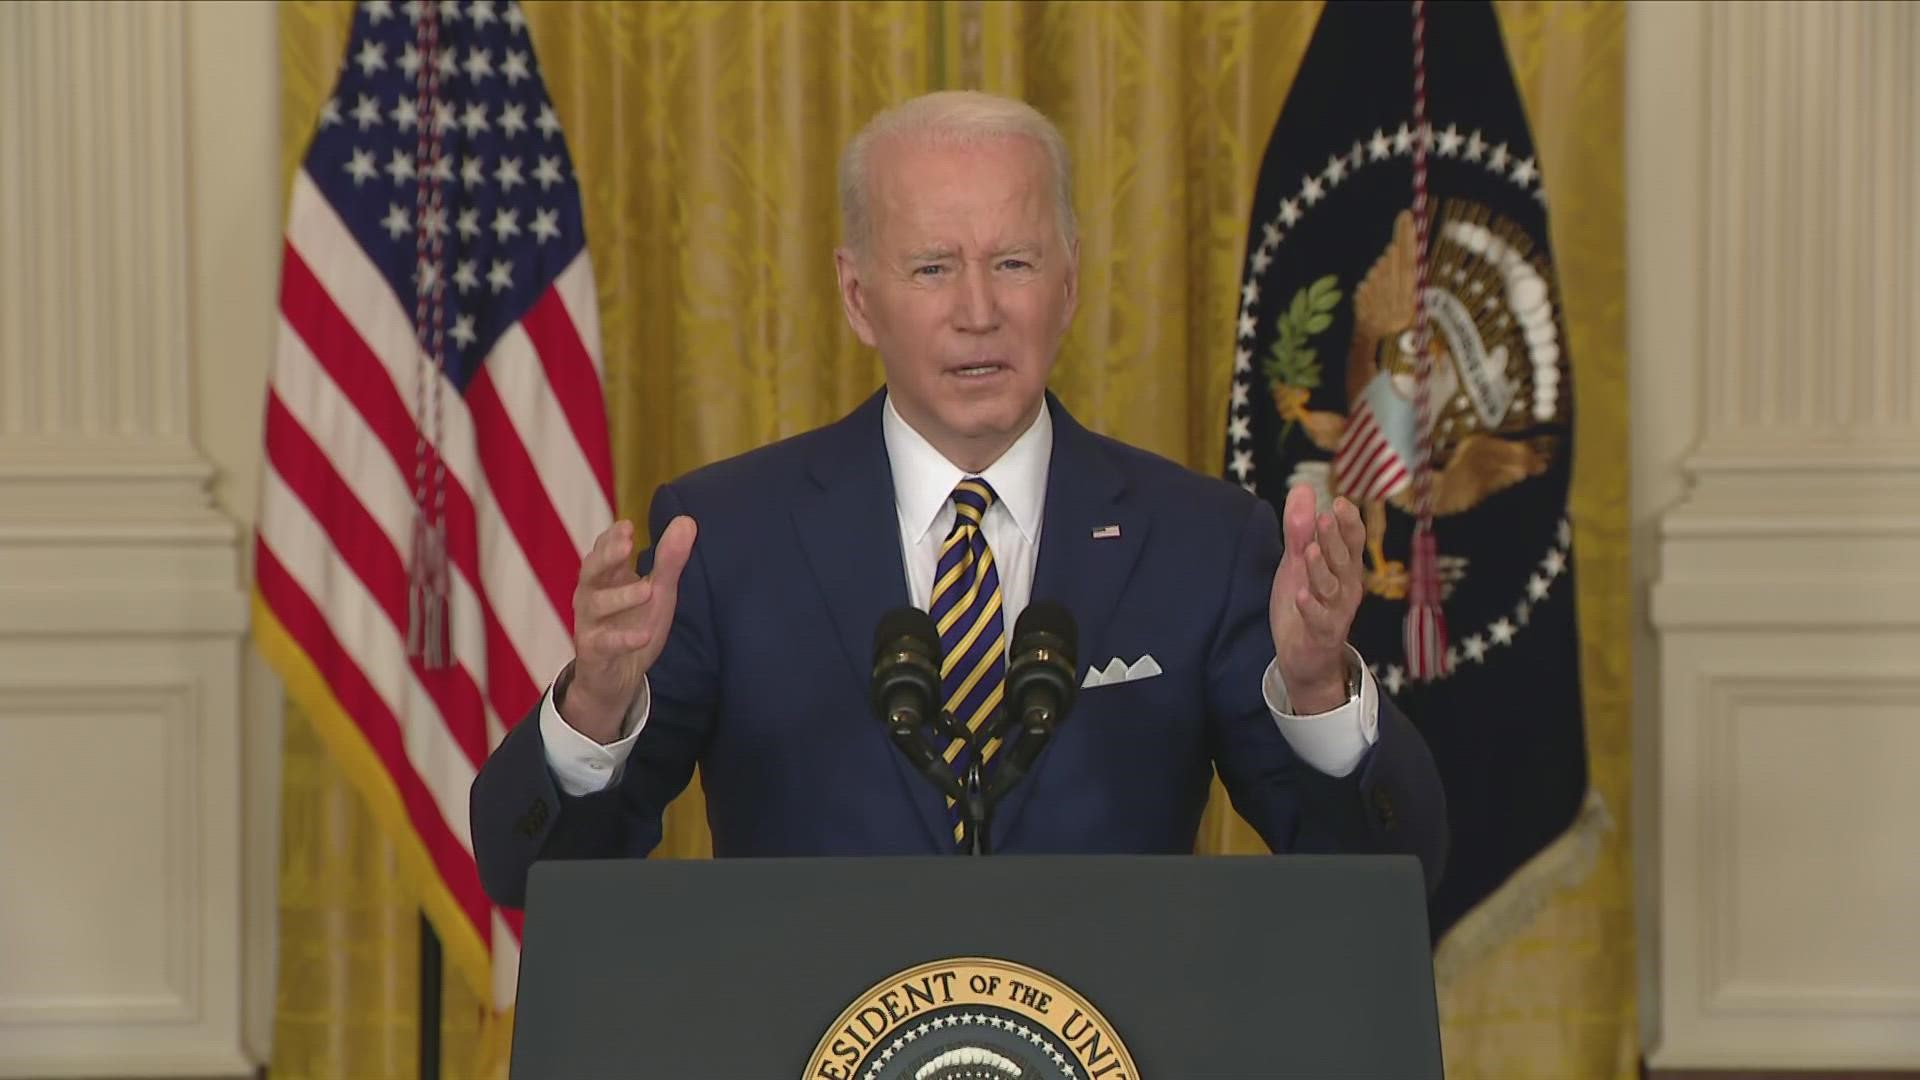 One day ahead of his one-year anniversary of taking office, Biden spoke on his administration's actions during the pandemic, especially vaccination efforts.